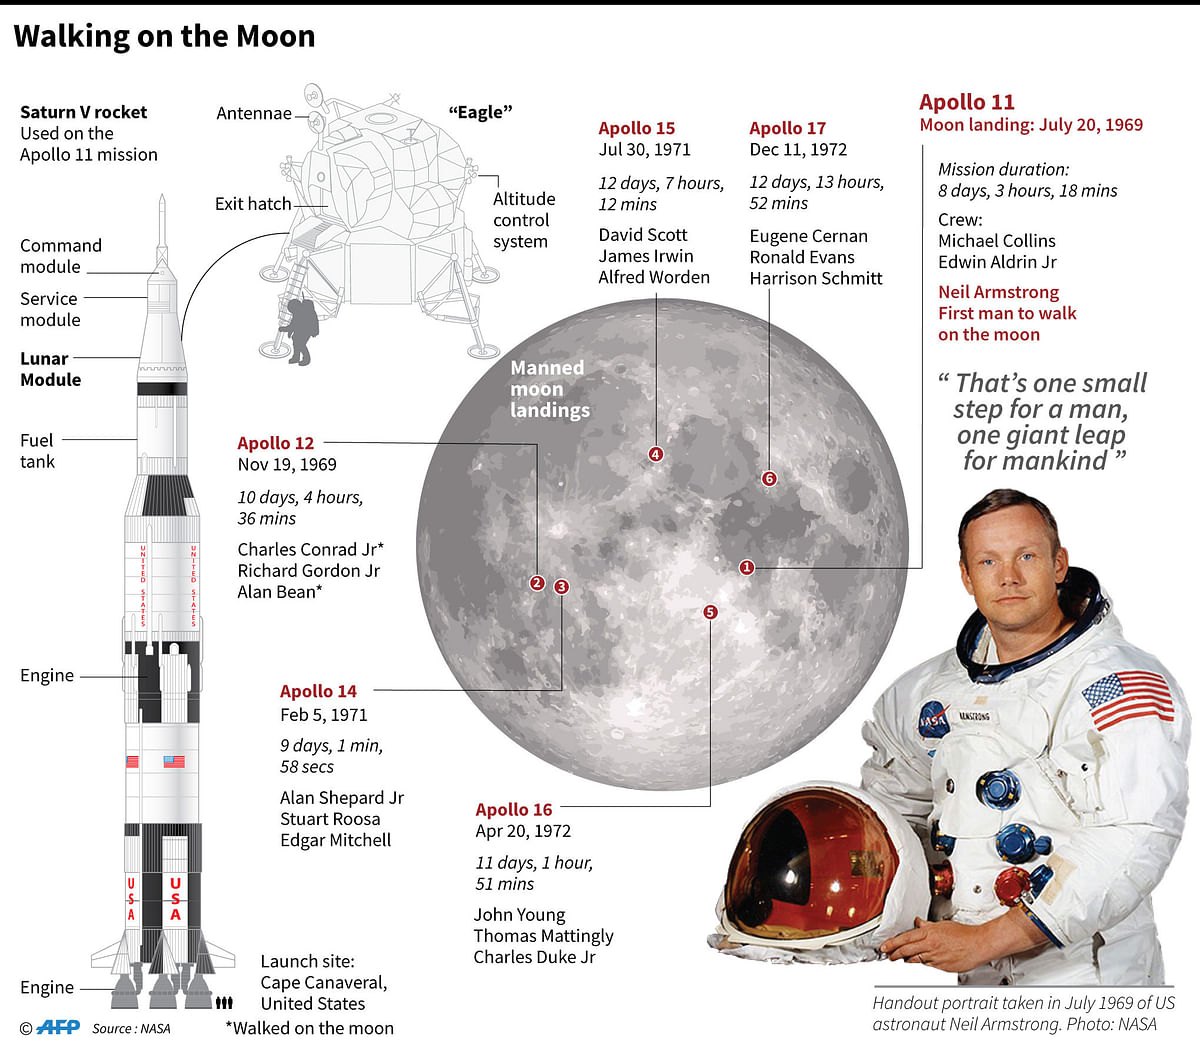 Graphic on crewed missions to the moon, ahead of the 50th anniversary of the first human steps on the moon by Neil Armstrong on 20 July 1969. Photo: AFP